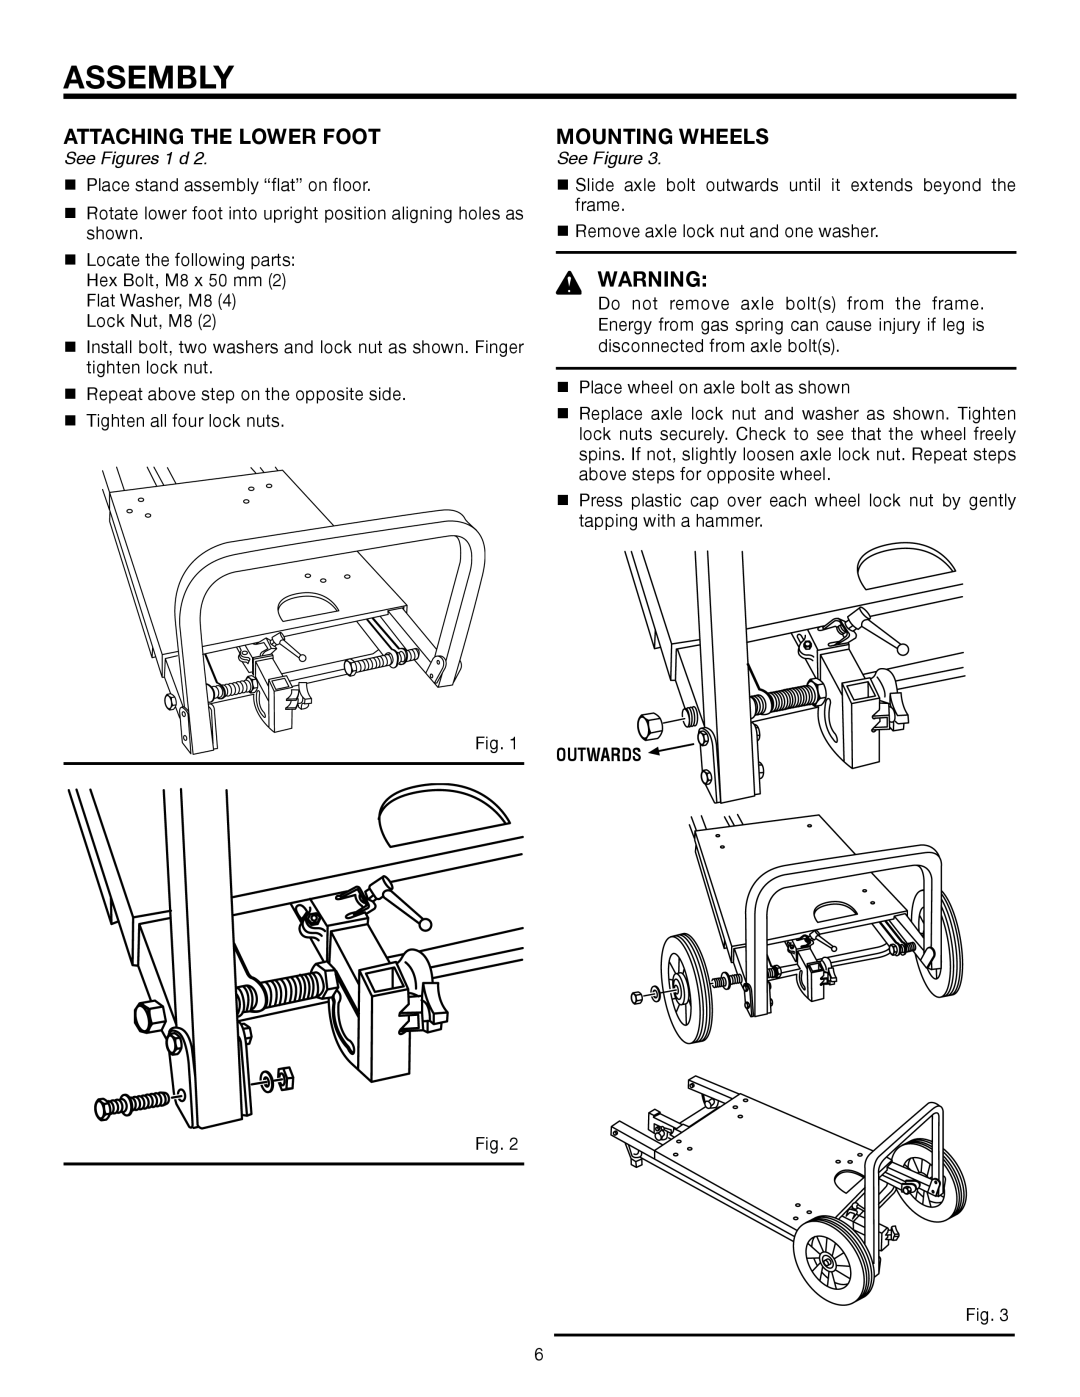 RIDGID AC99402 manual Assembly, Attaching The Lower Foot, Mounting Wheels, See Figures 1 d, Outwards 